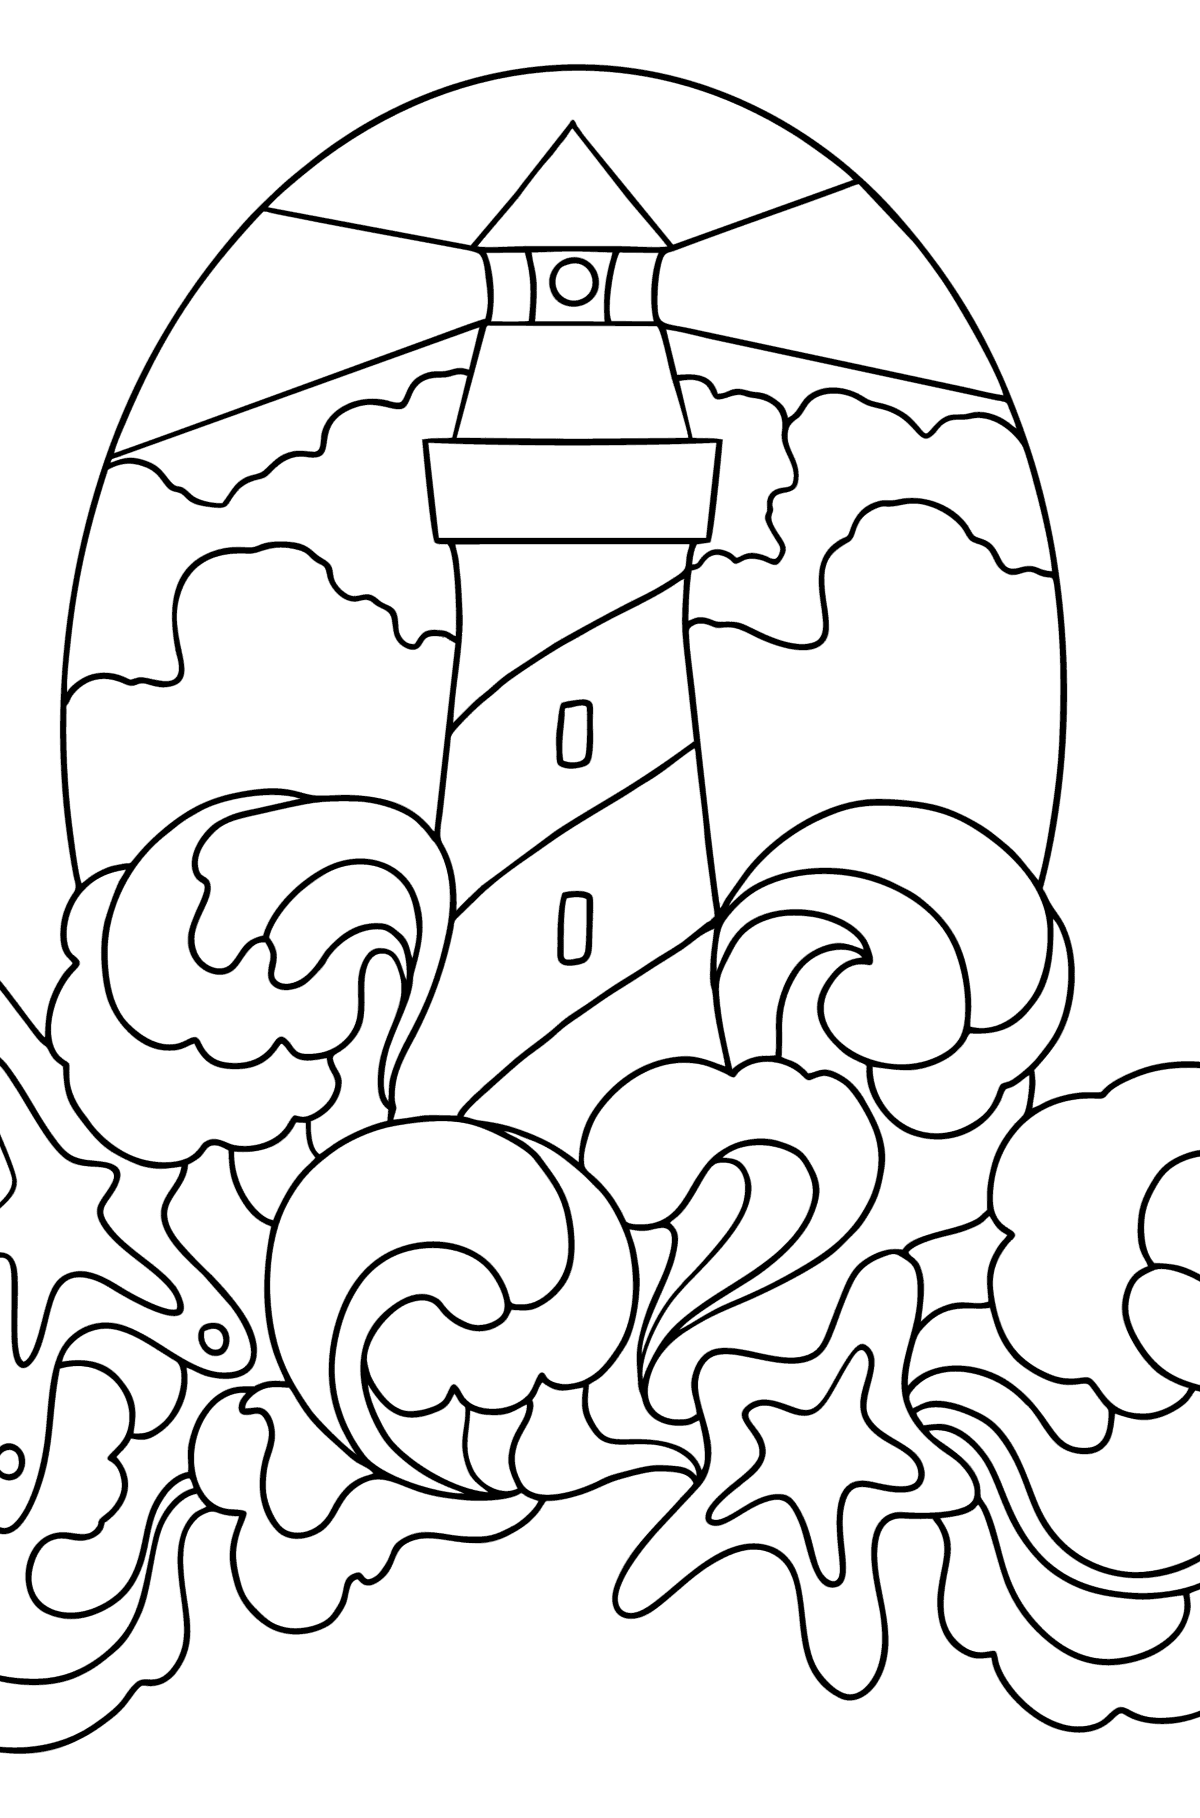 Tattoos coloring pages for Adults - Online or Printable